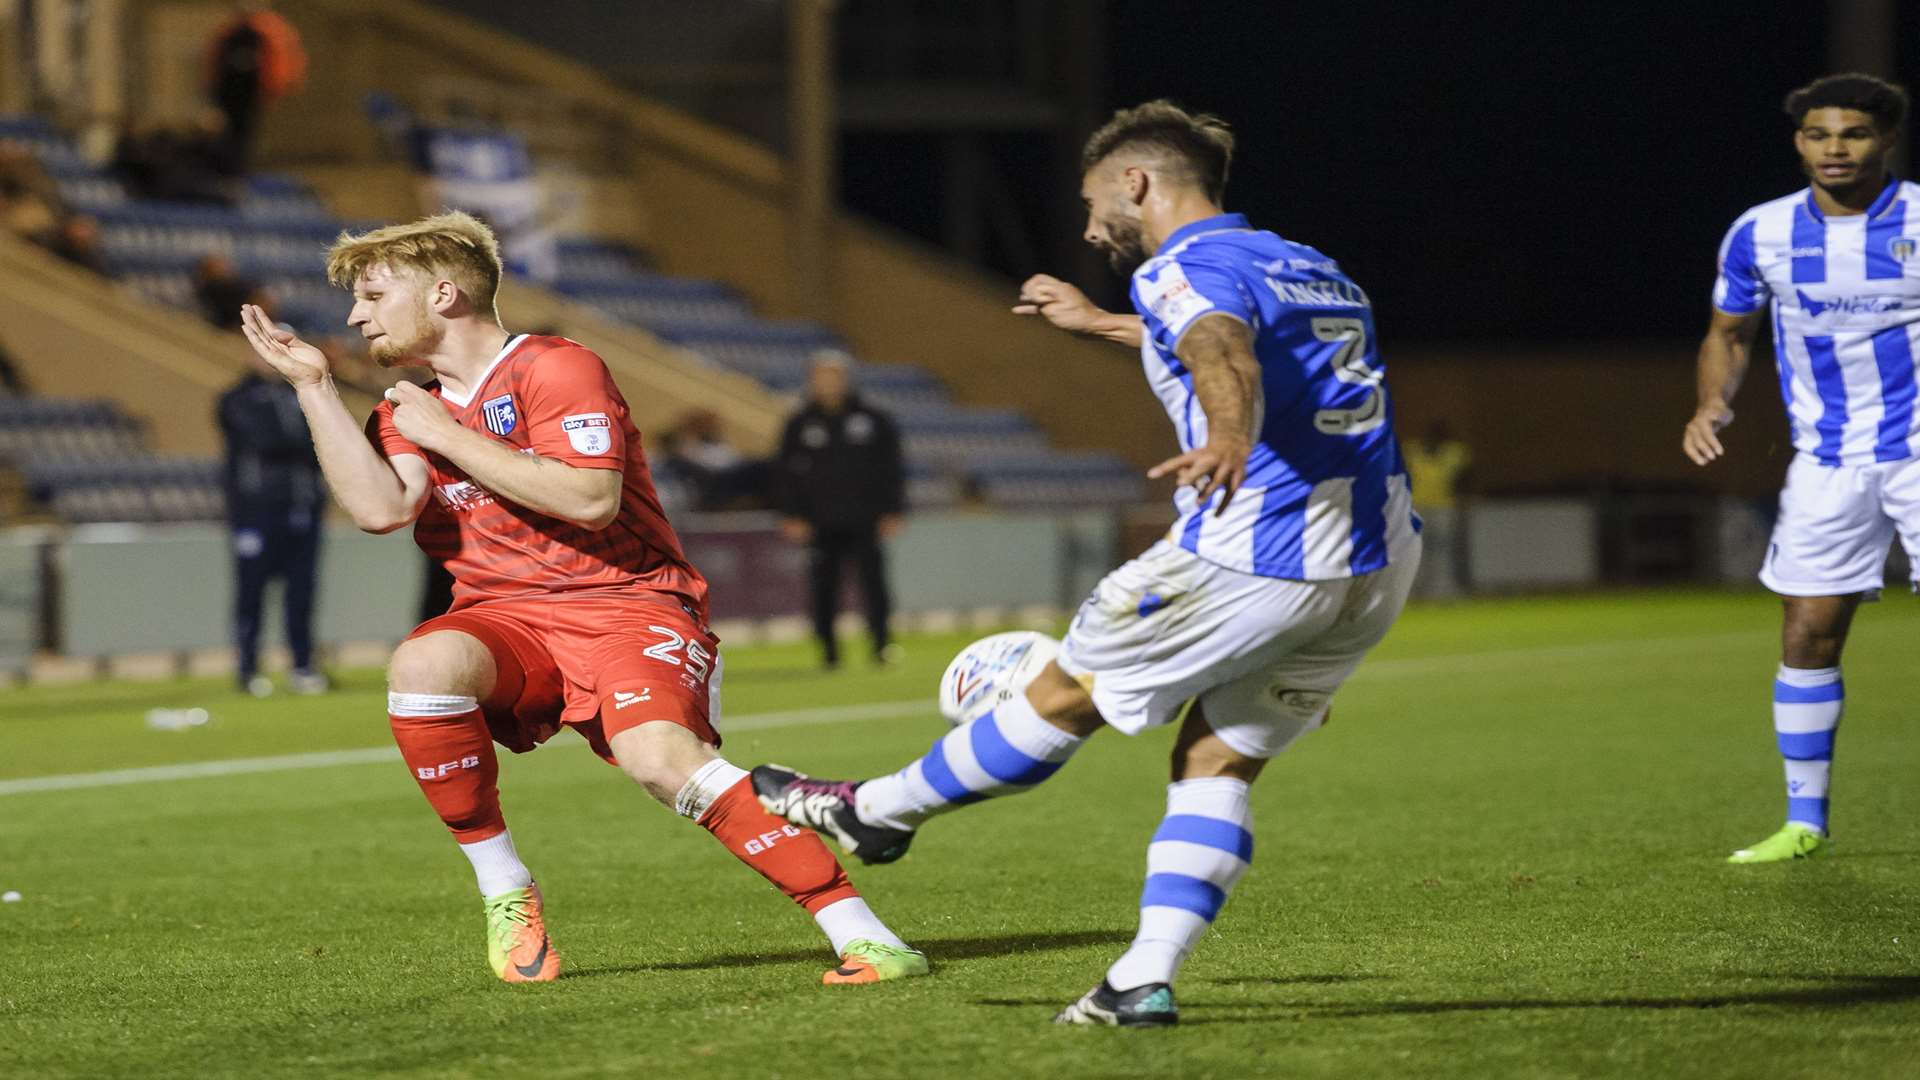 Finn O'Mara made his first start for Gills Picture: Andy Payton